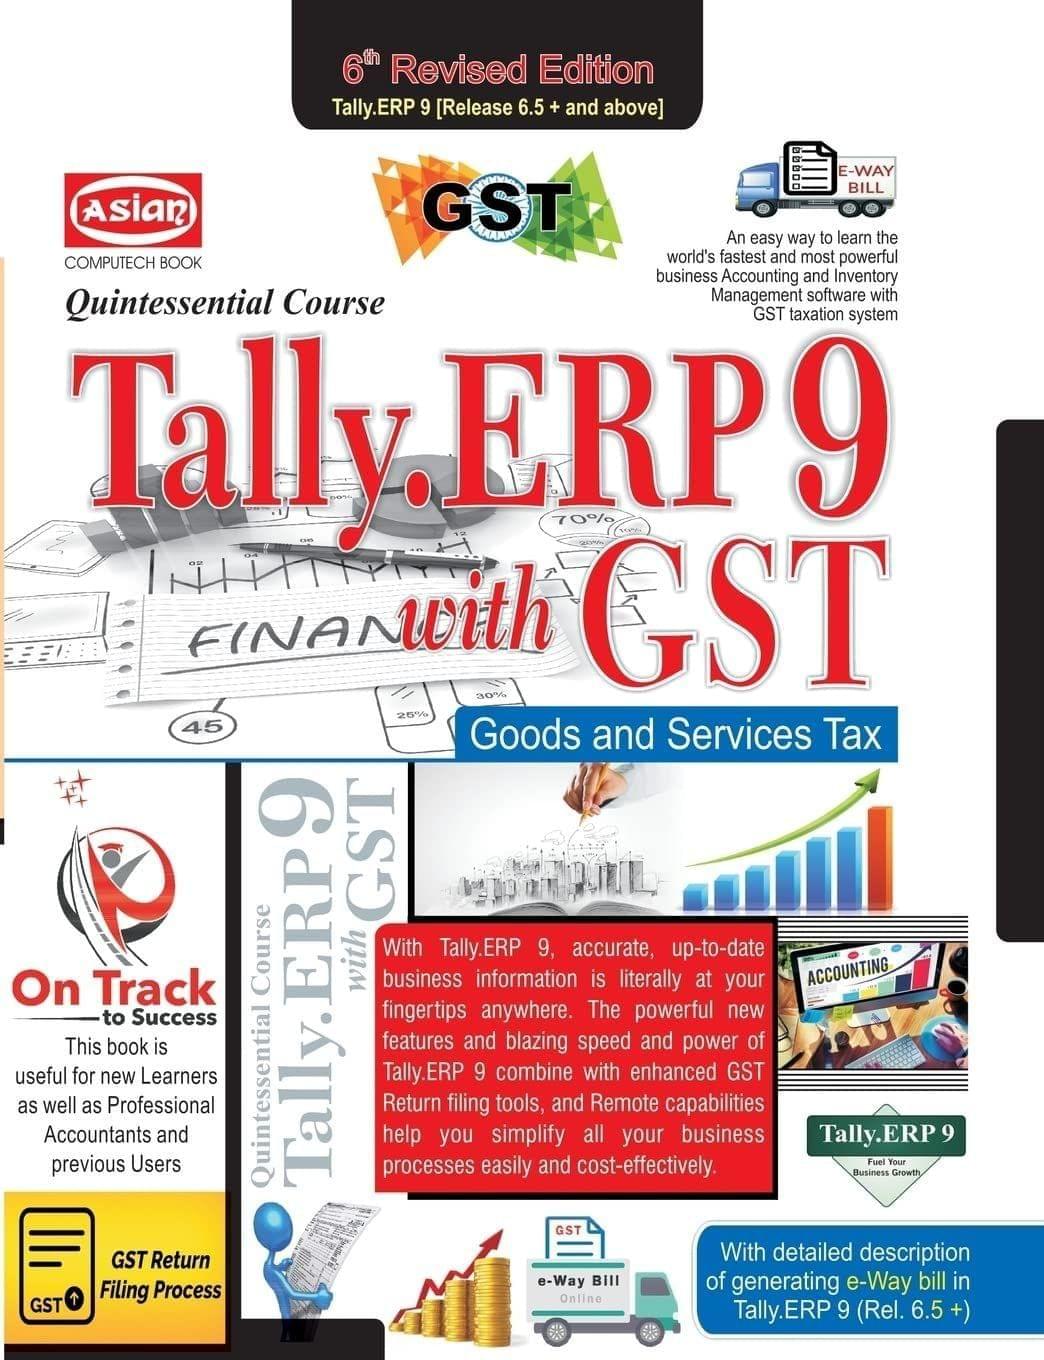 TALLY.ERP9 FOR G.S.T. QUINTESSENTIAL COURSE 6TH ED. VER. [Paperback] A Panel of Authors